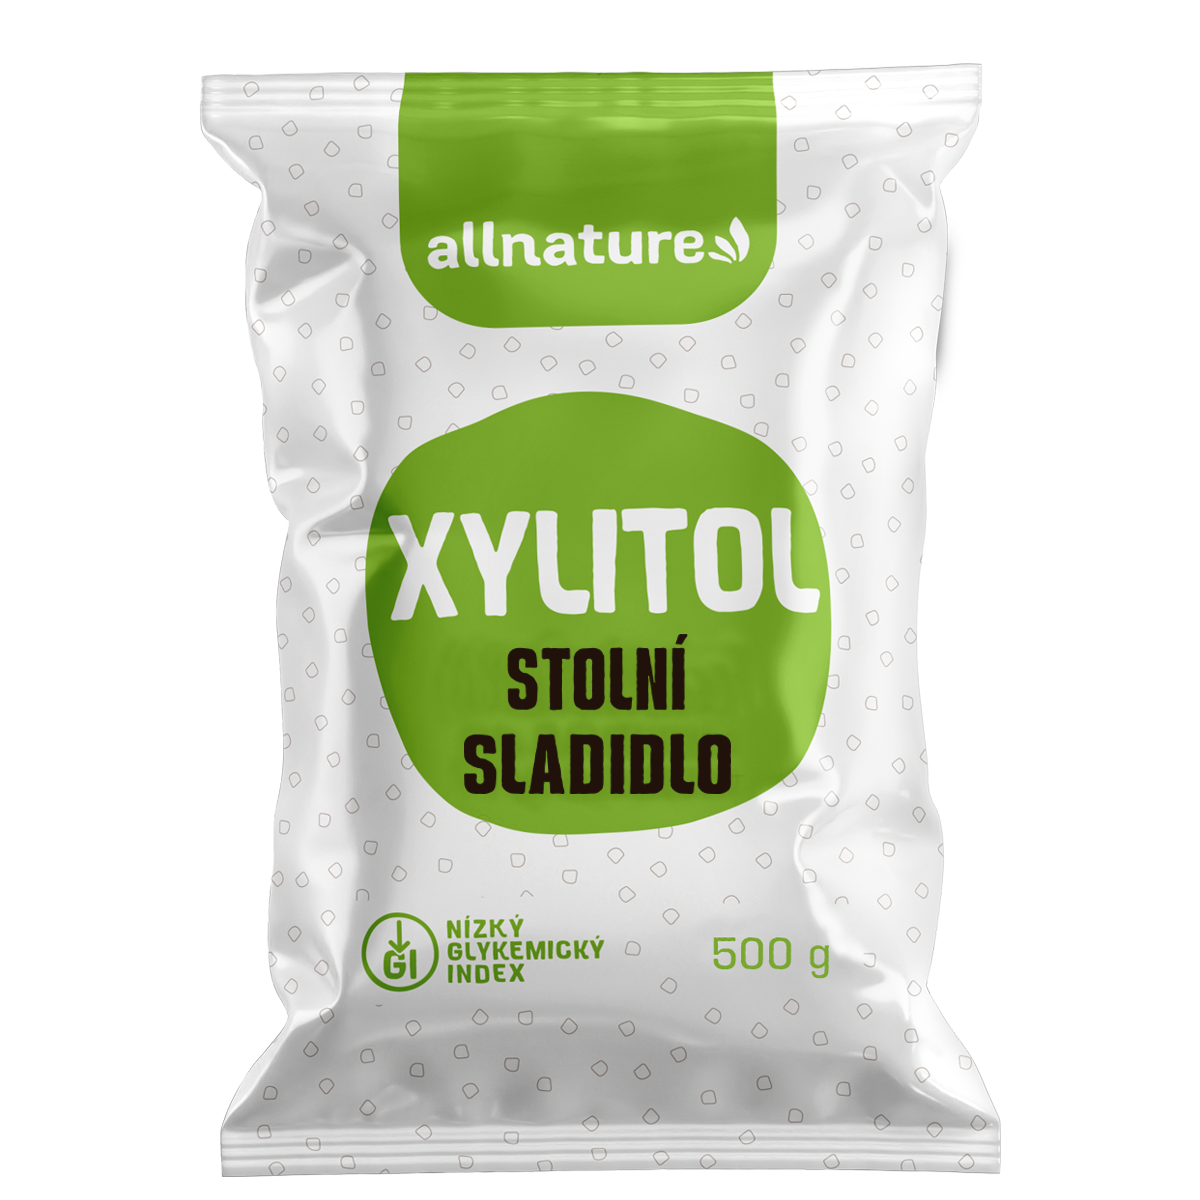 Allnature Xylitol 500 g